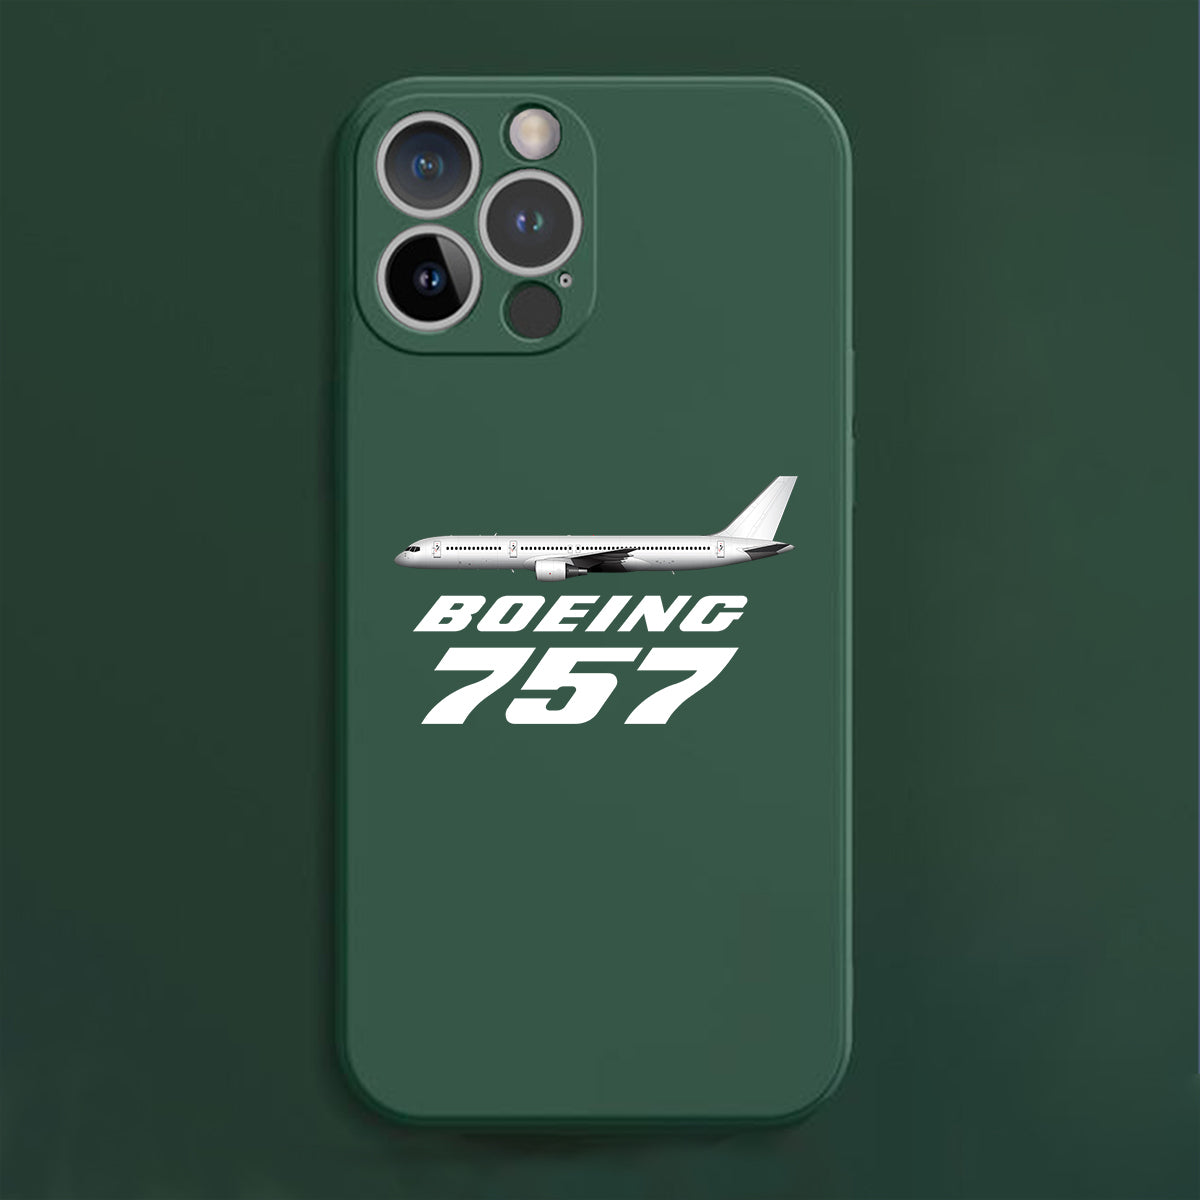 The Boeing 757 Designed Soft Silicone iPhone Cases